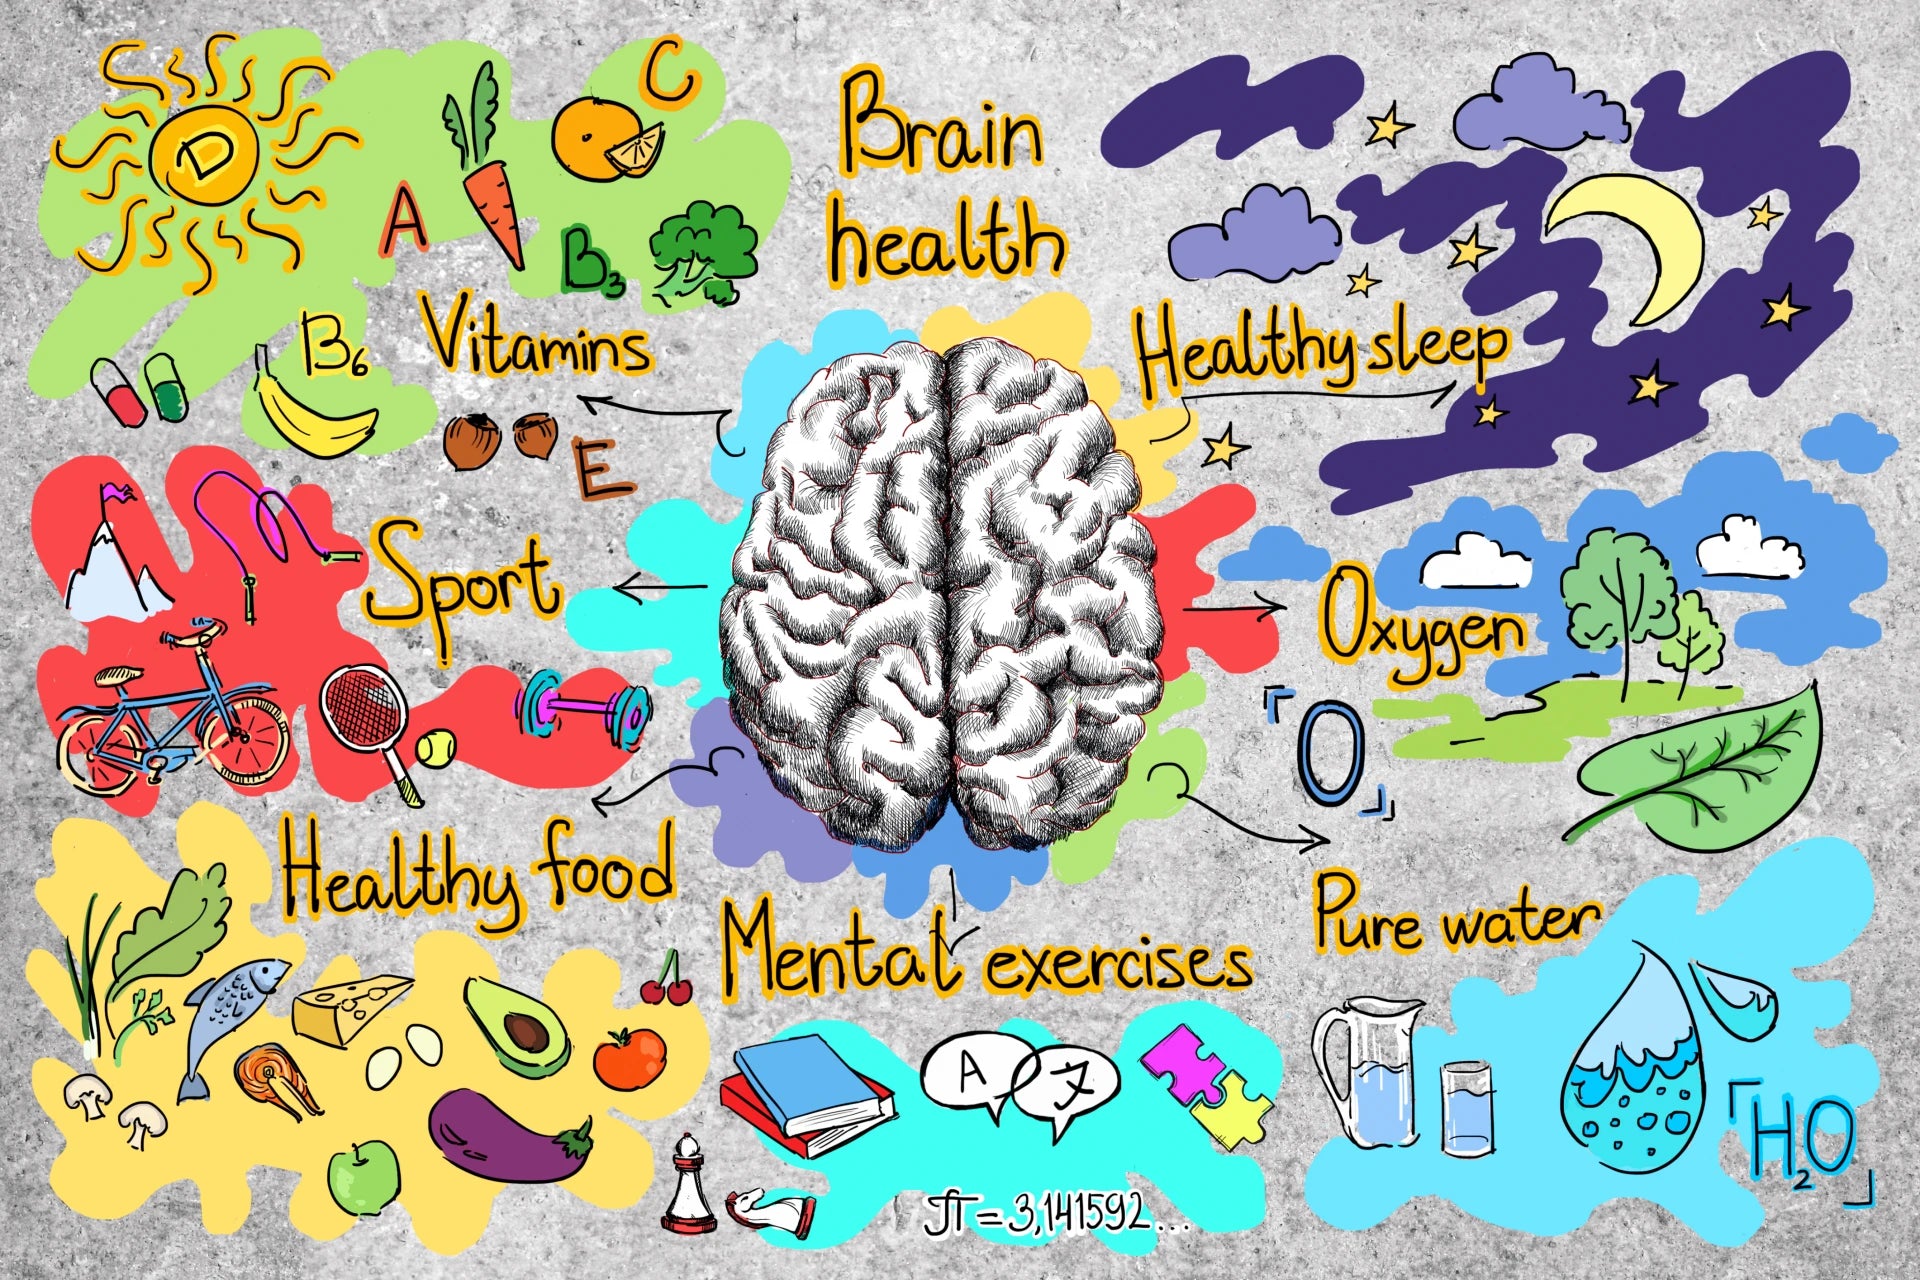 10 Simple Ways to Boost Your Brain Health!